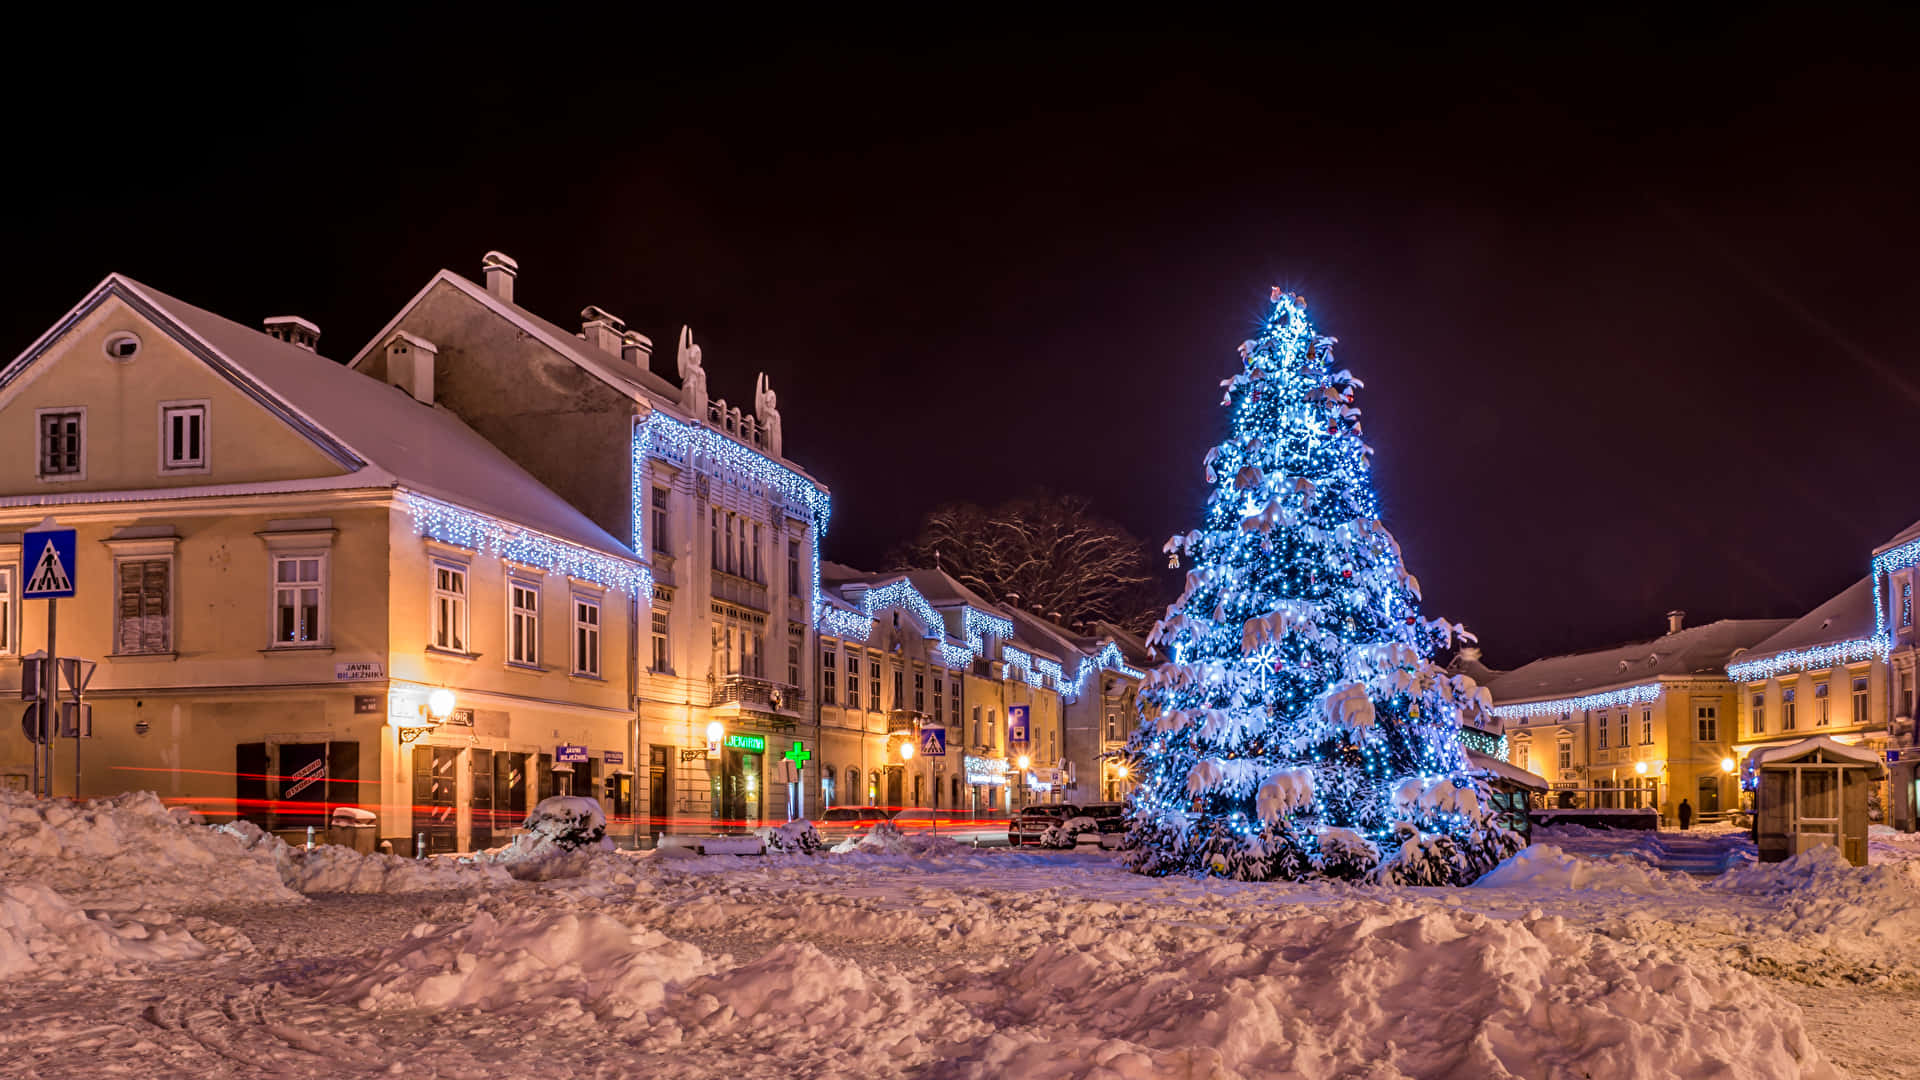 A Christmas Tree In A Snowy Town Wallpaper